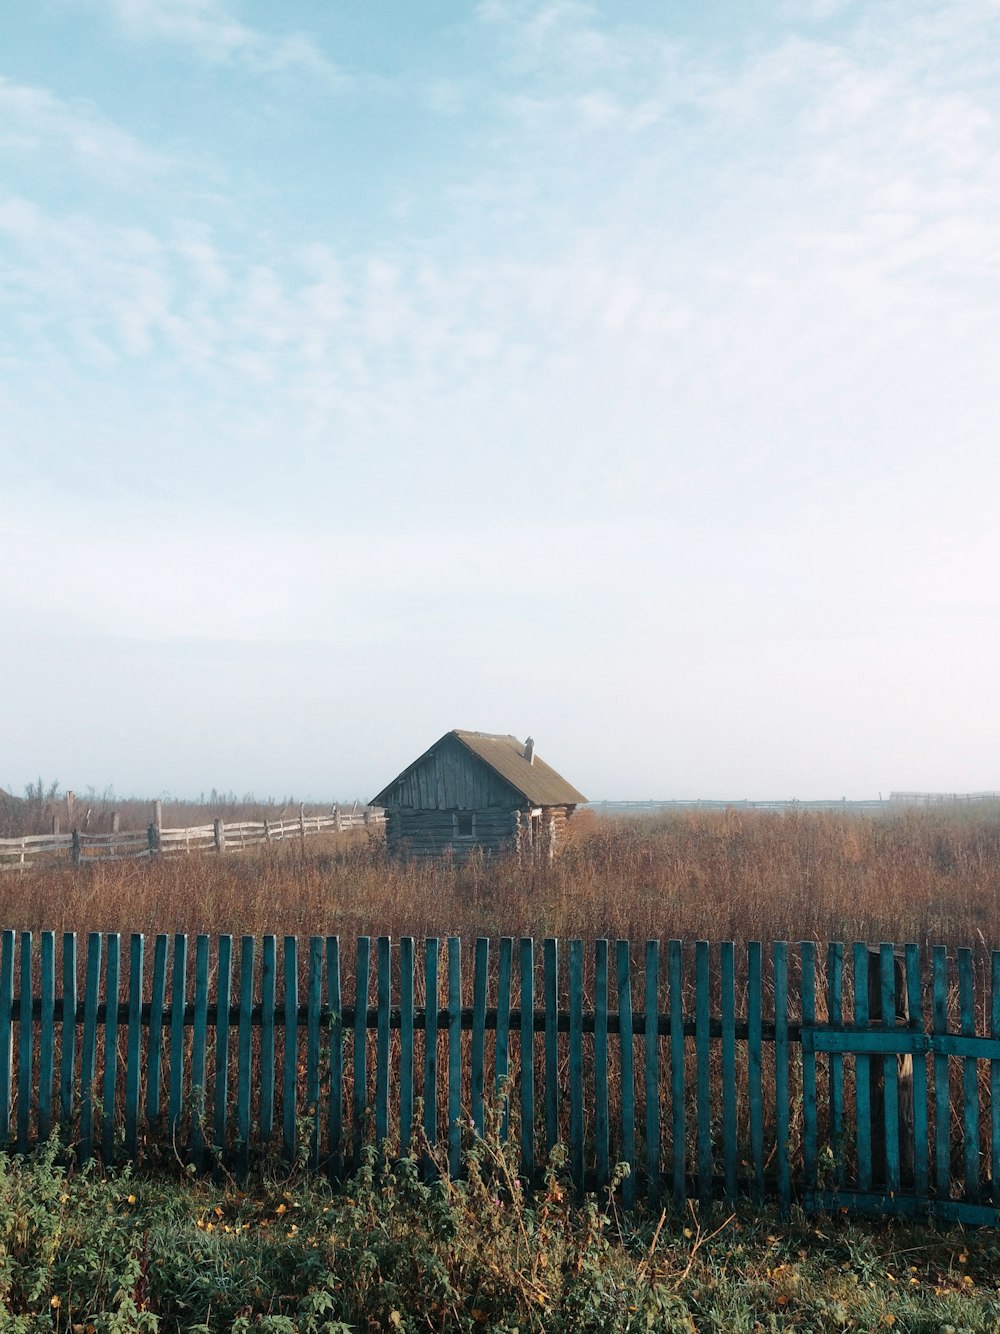 a wooden fence in a field with a barn in the background